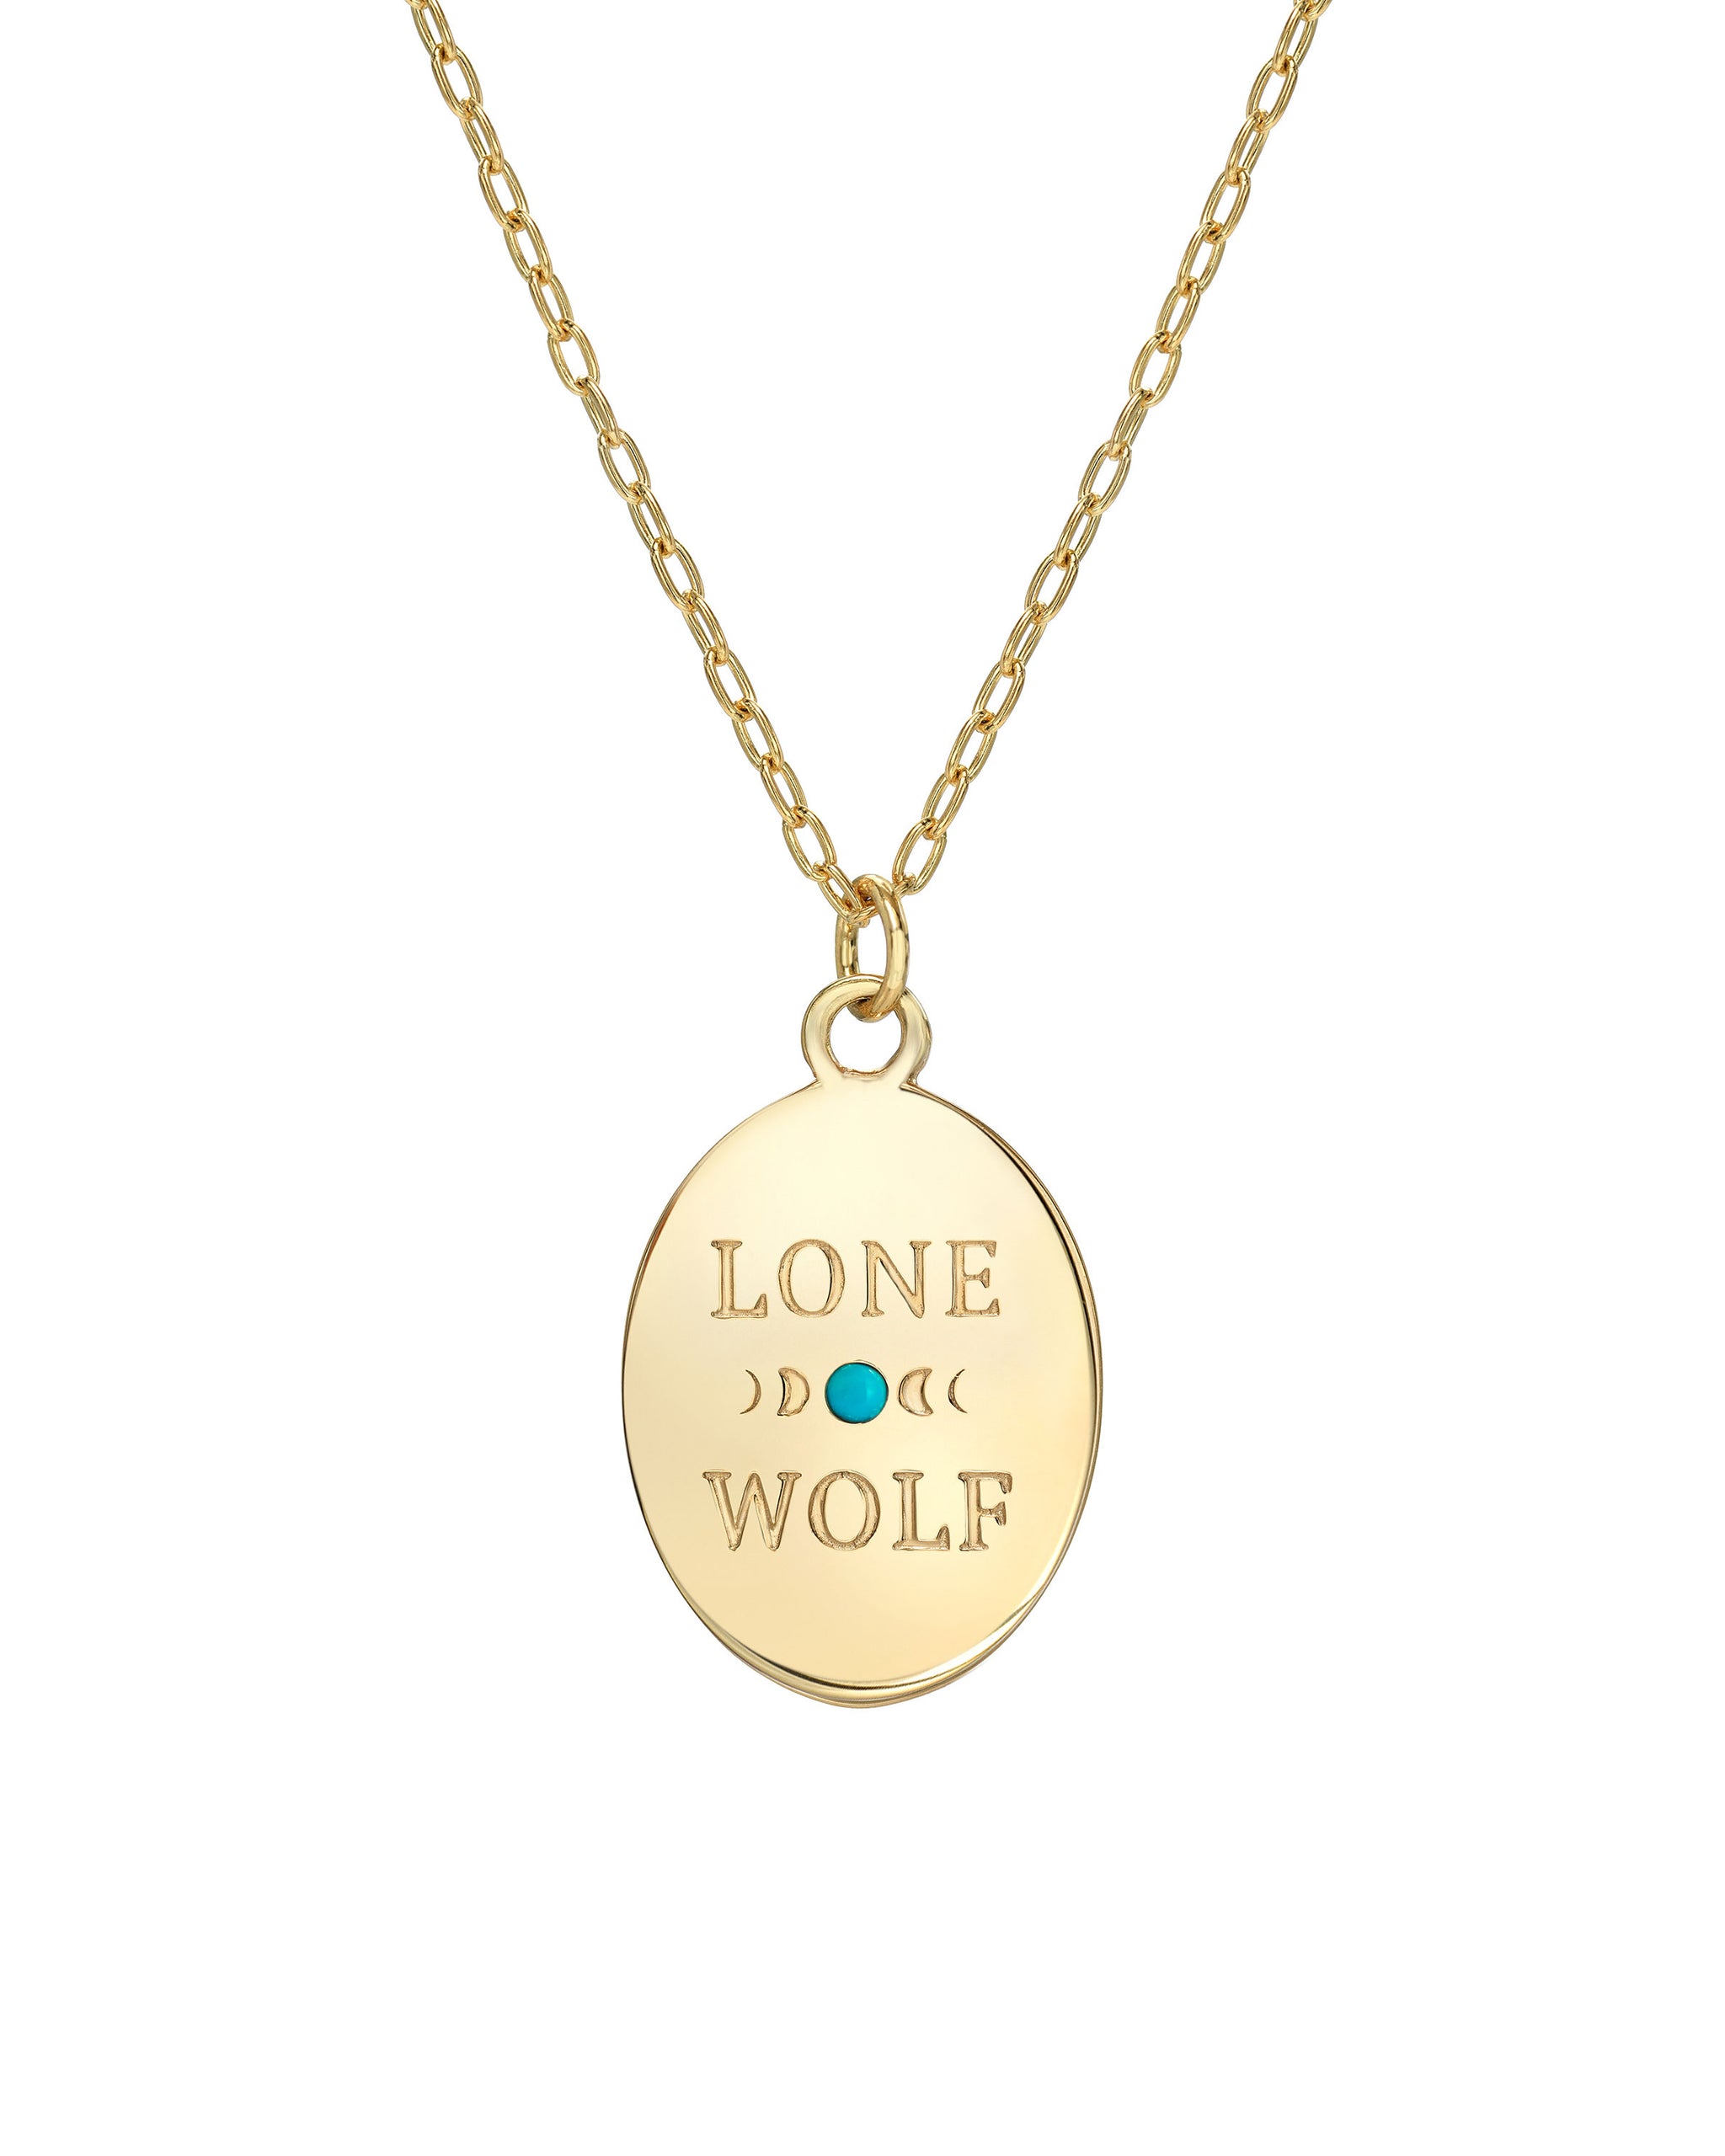 Lone Wolf Necklace, 14k Yellow Gold, Moon Phase & Diamond, handmade by Turquoise + Tobacco in Los Angeles, California